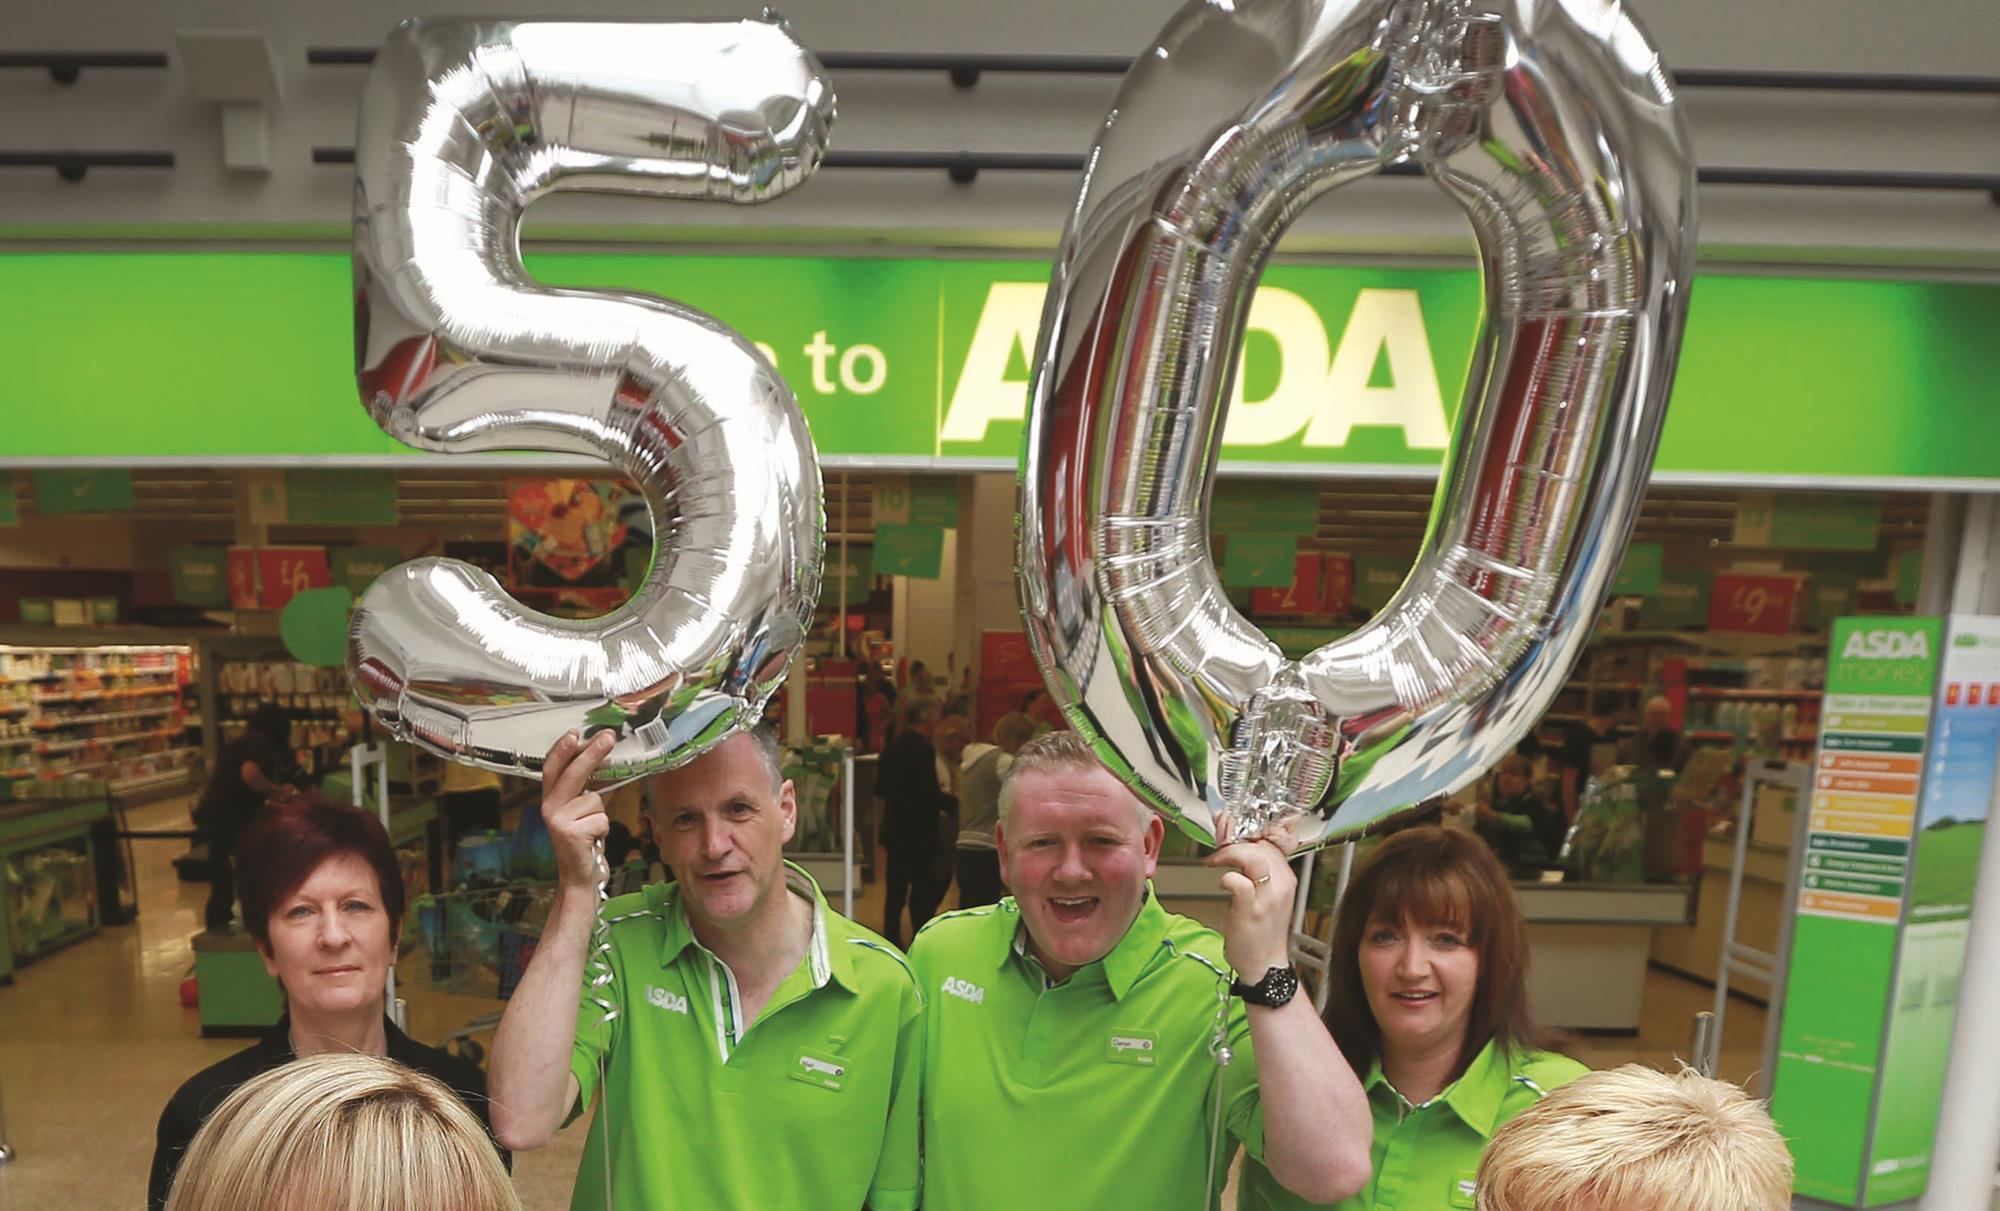 Asda targets overseas expansion for George brand